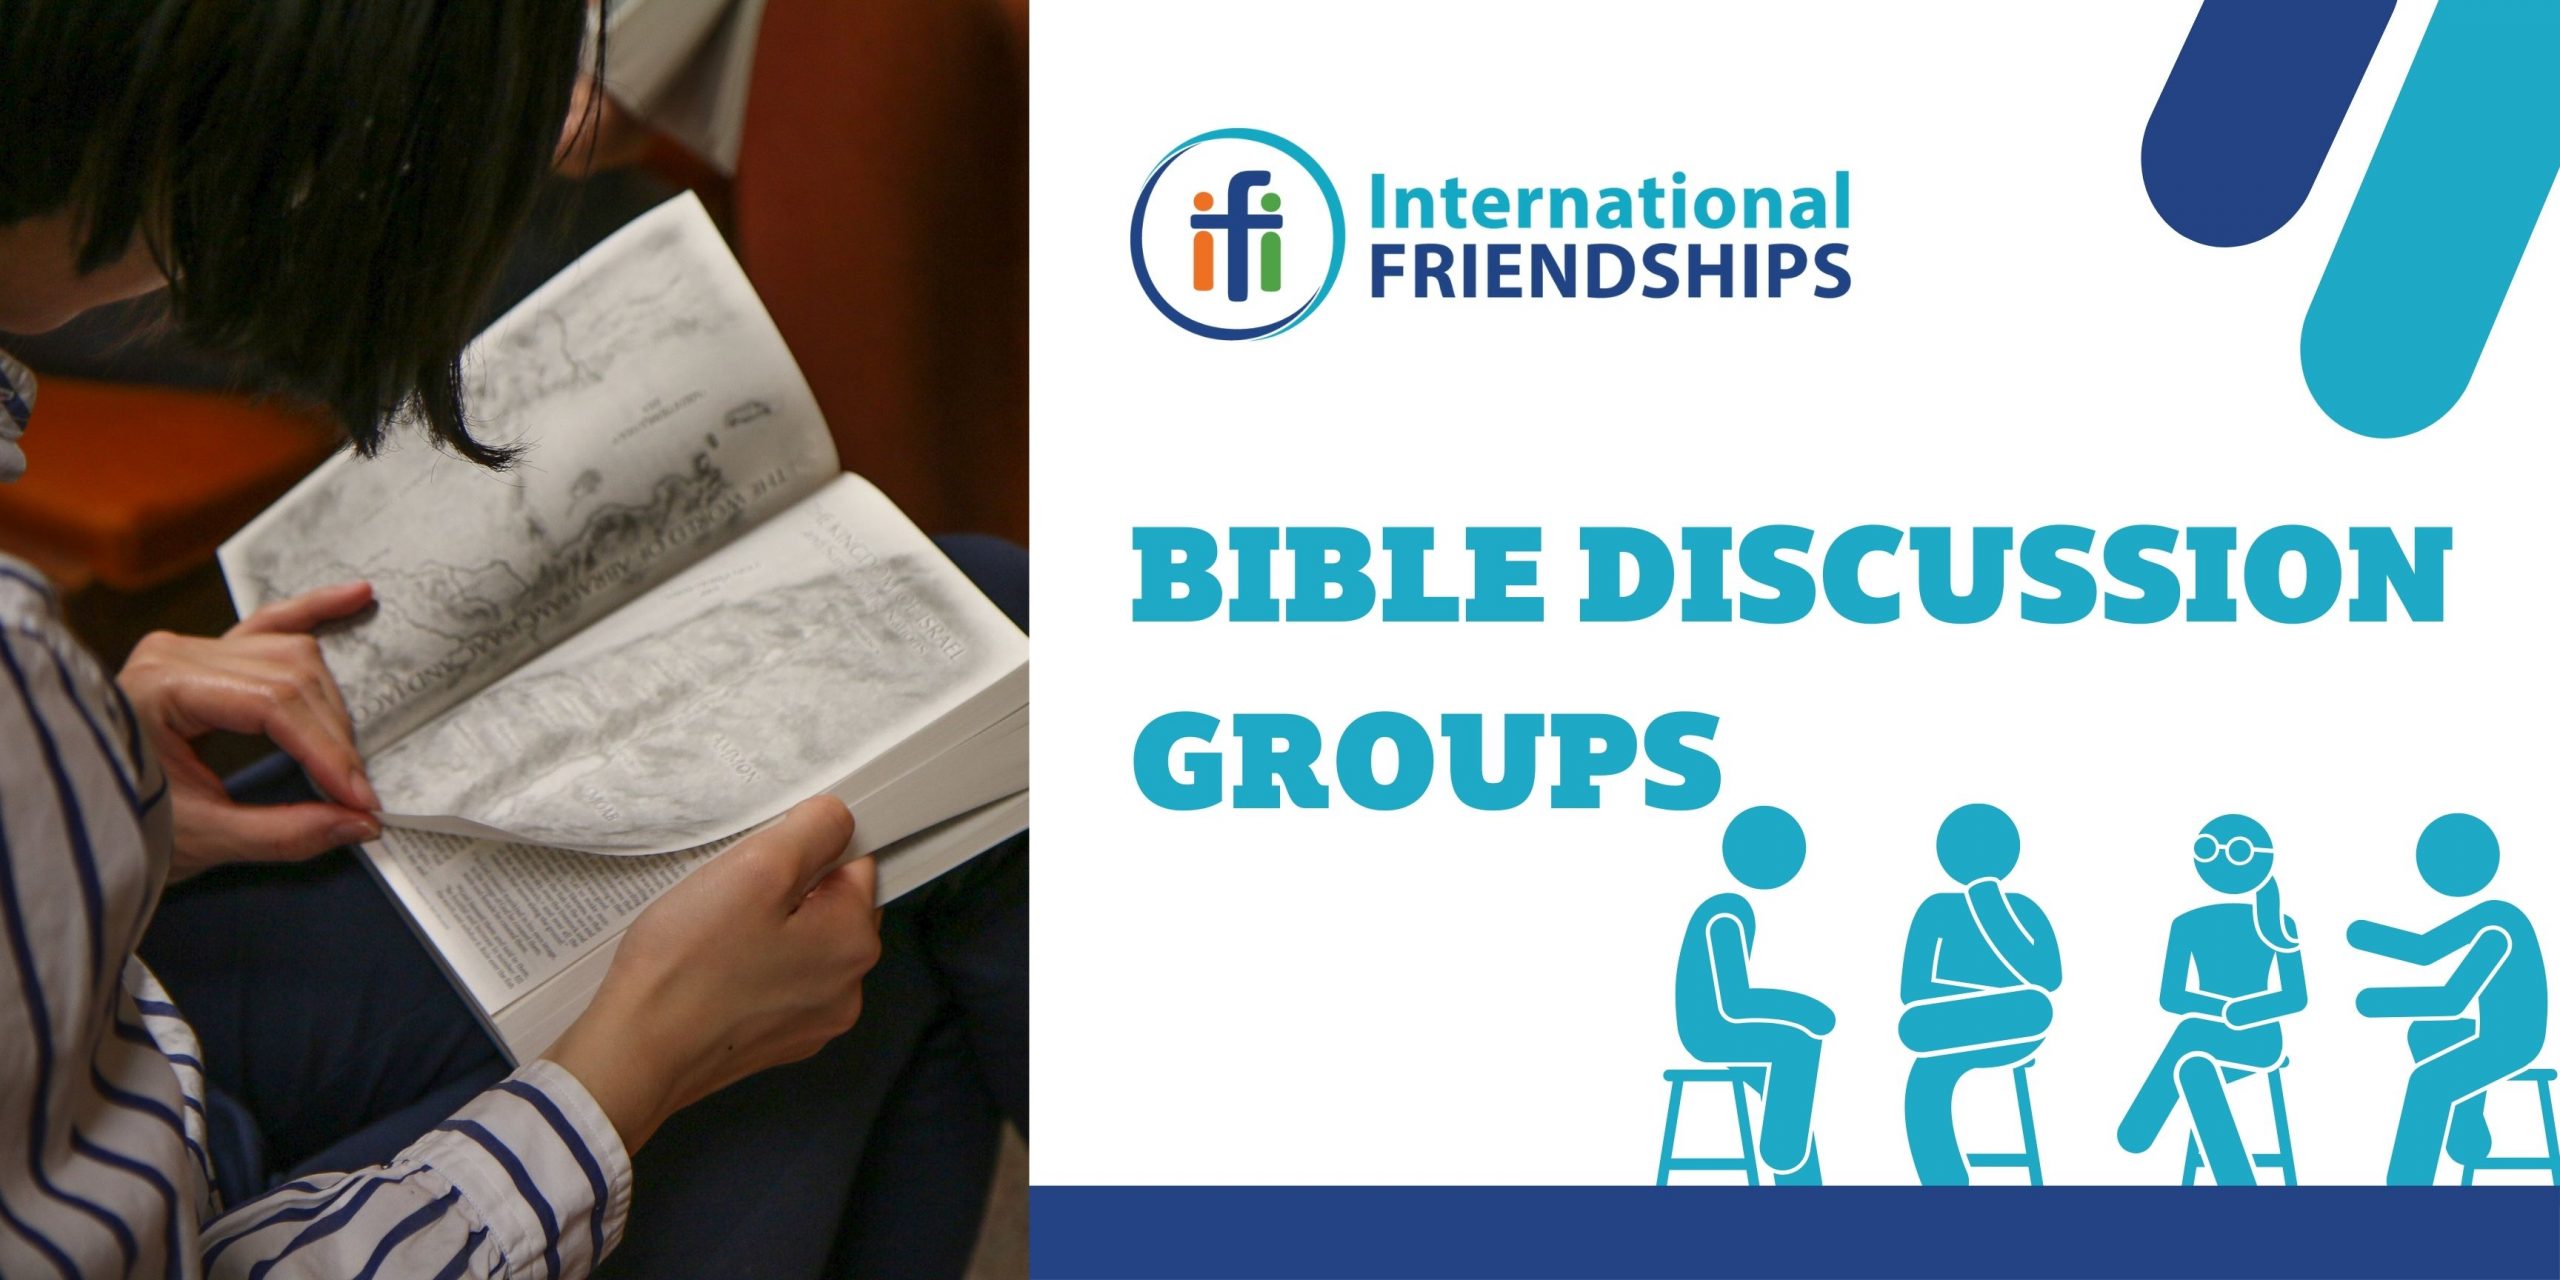 Bible Discussion Groups